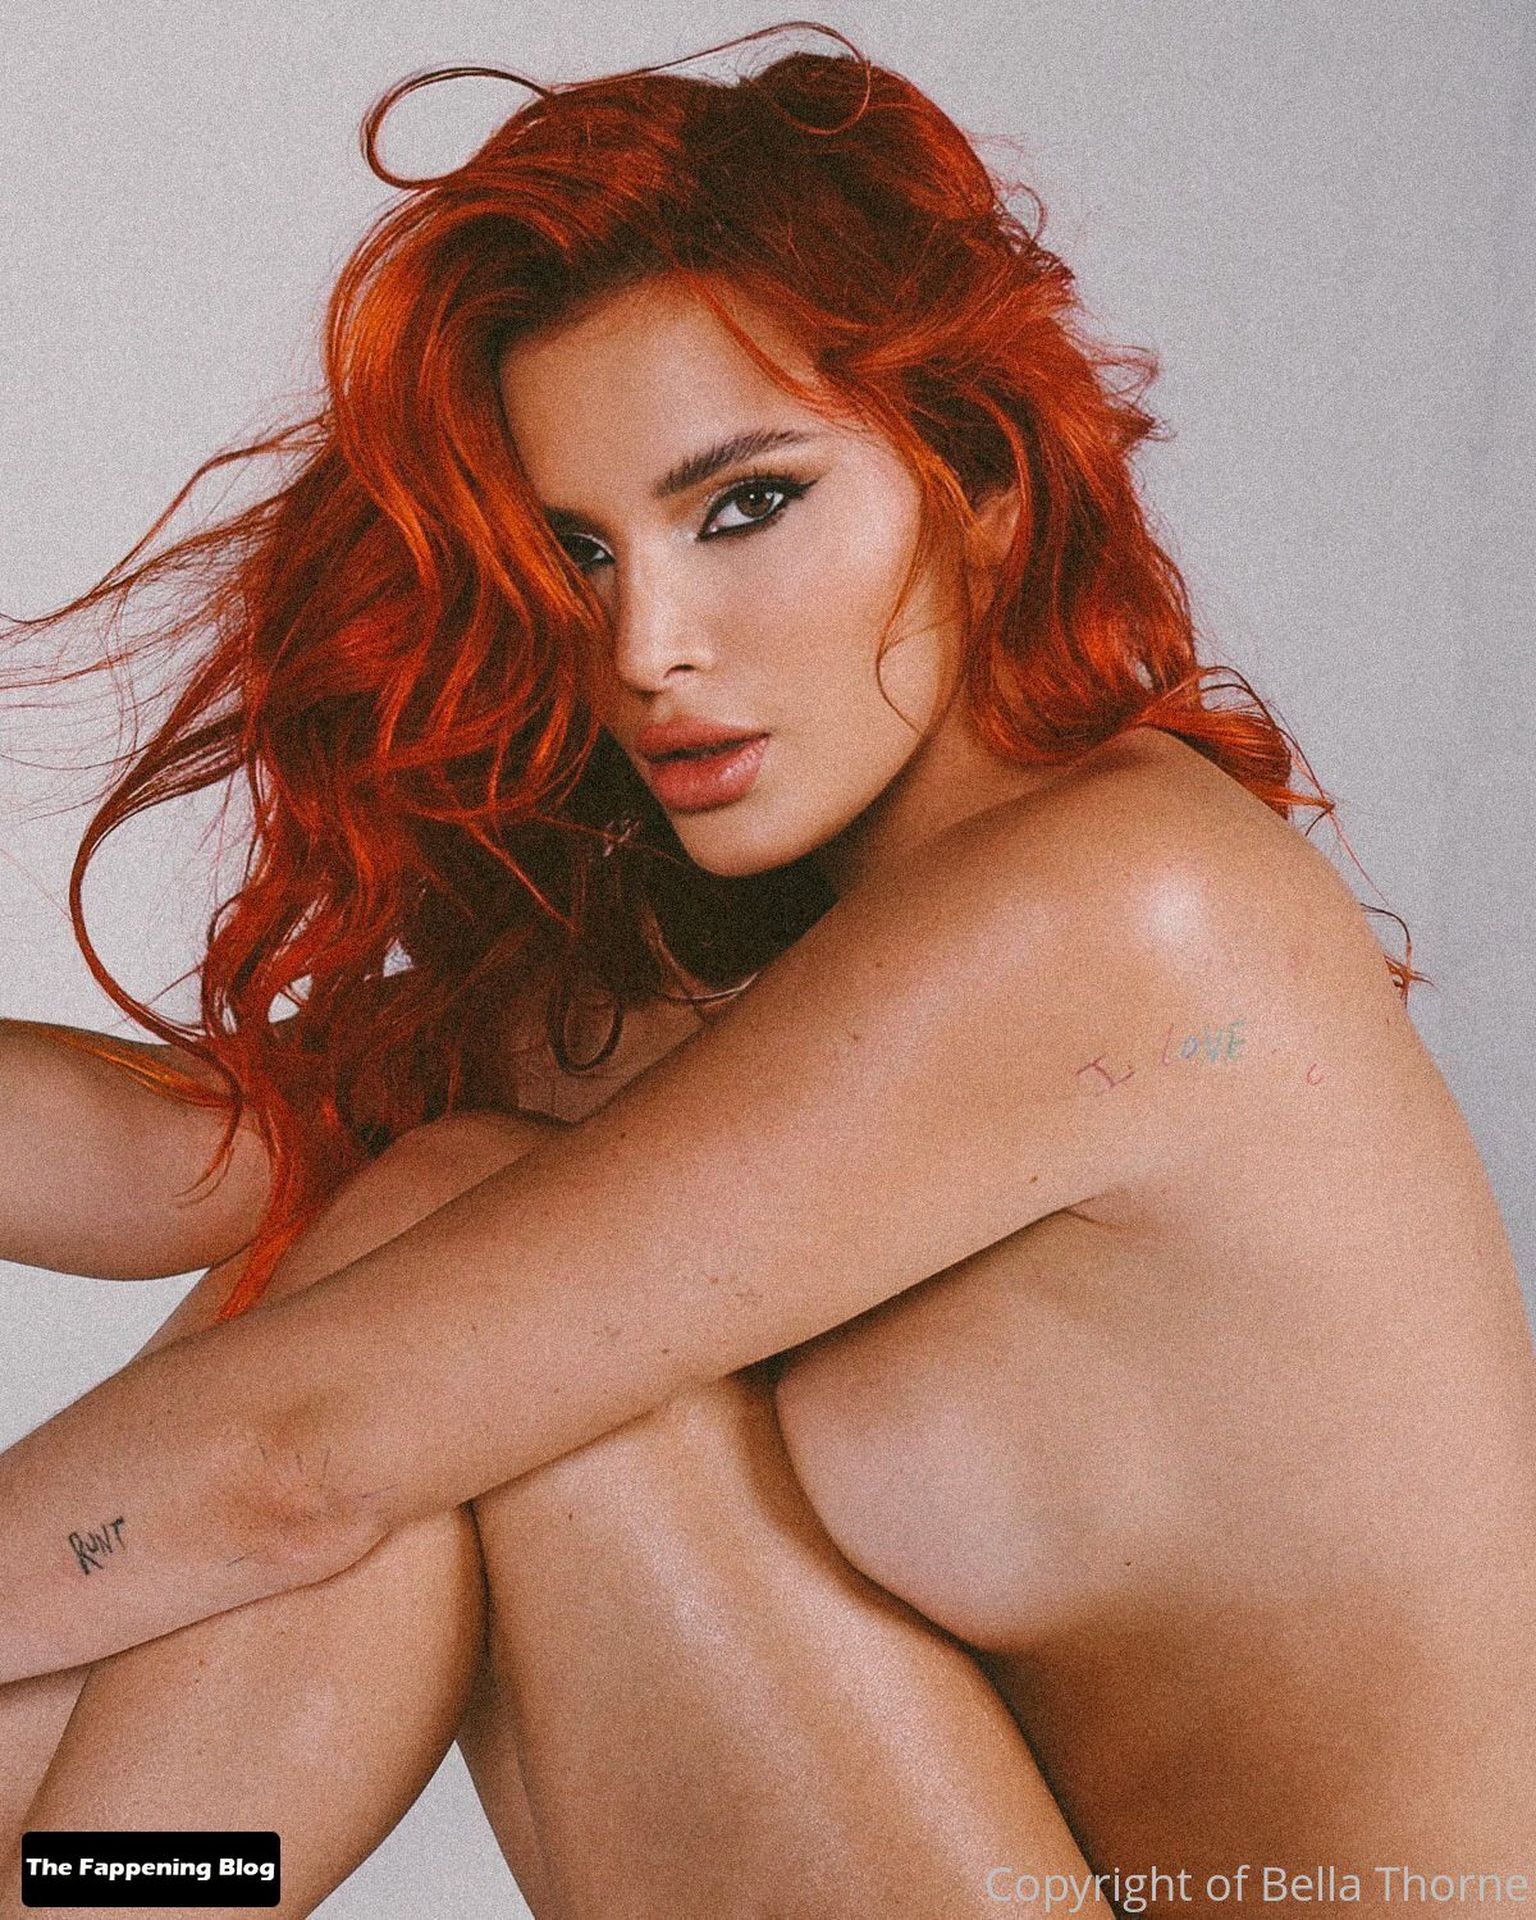 The Fappening Star Bella Thorne parades her beautiful body posing naked in ...